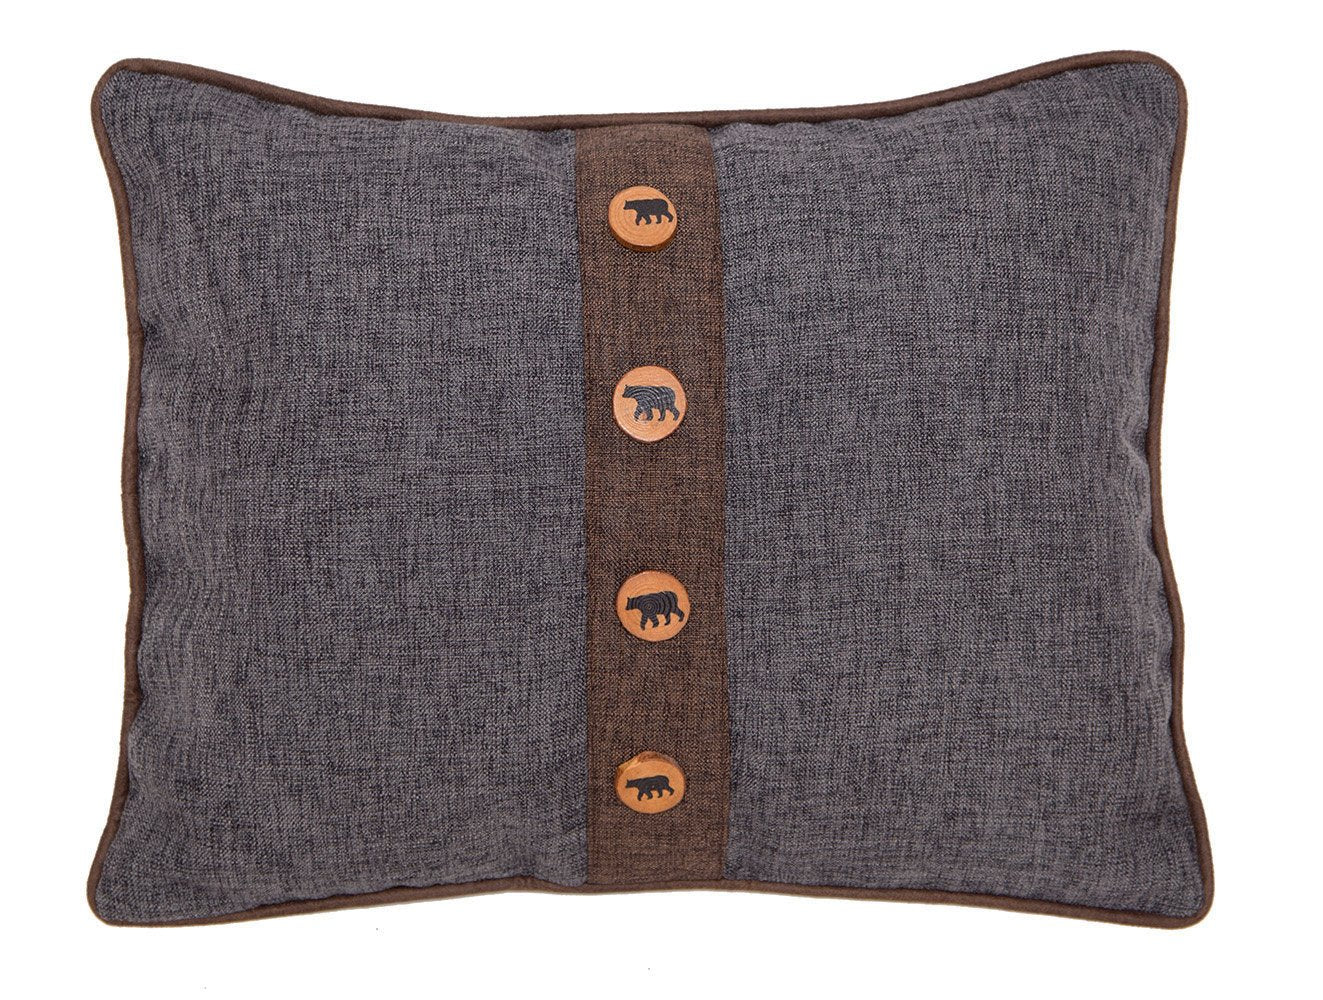 Rugged Earth Bear Pillow Carstens - Unique Linens Online